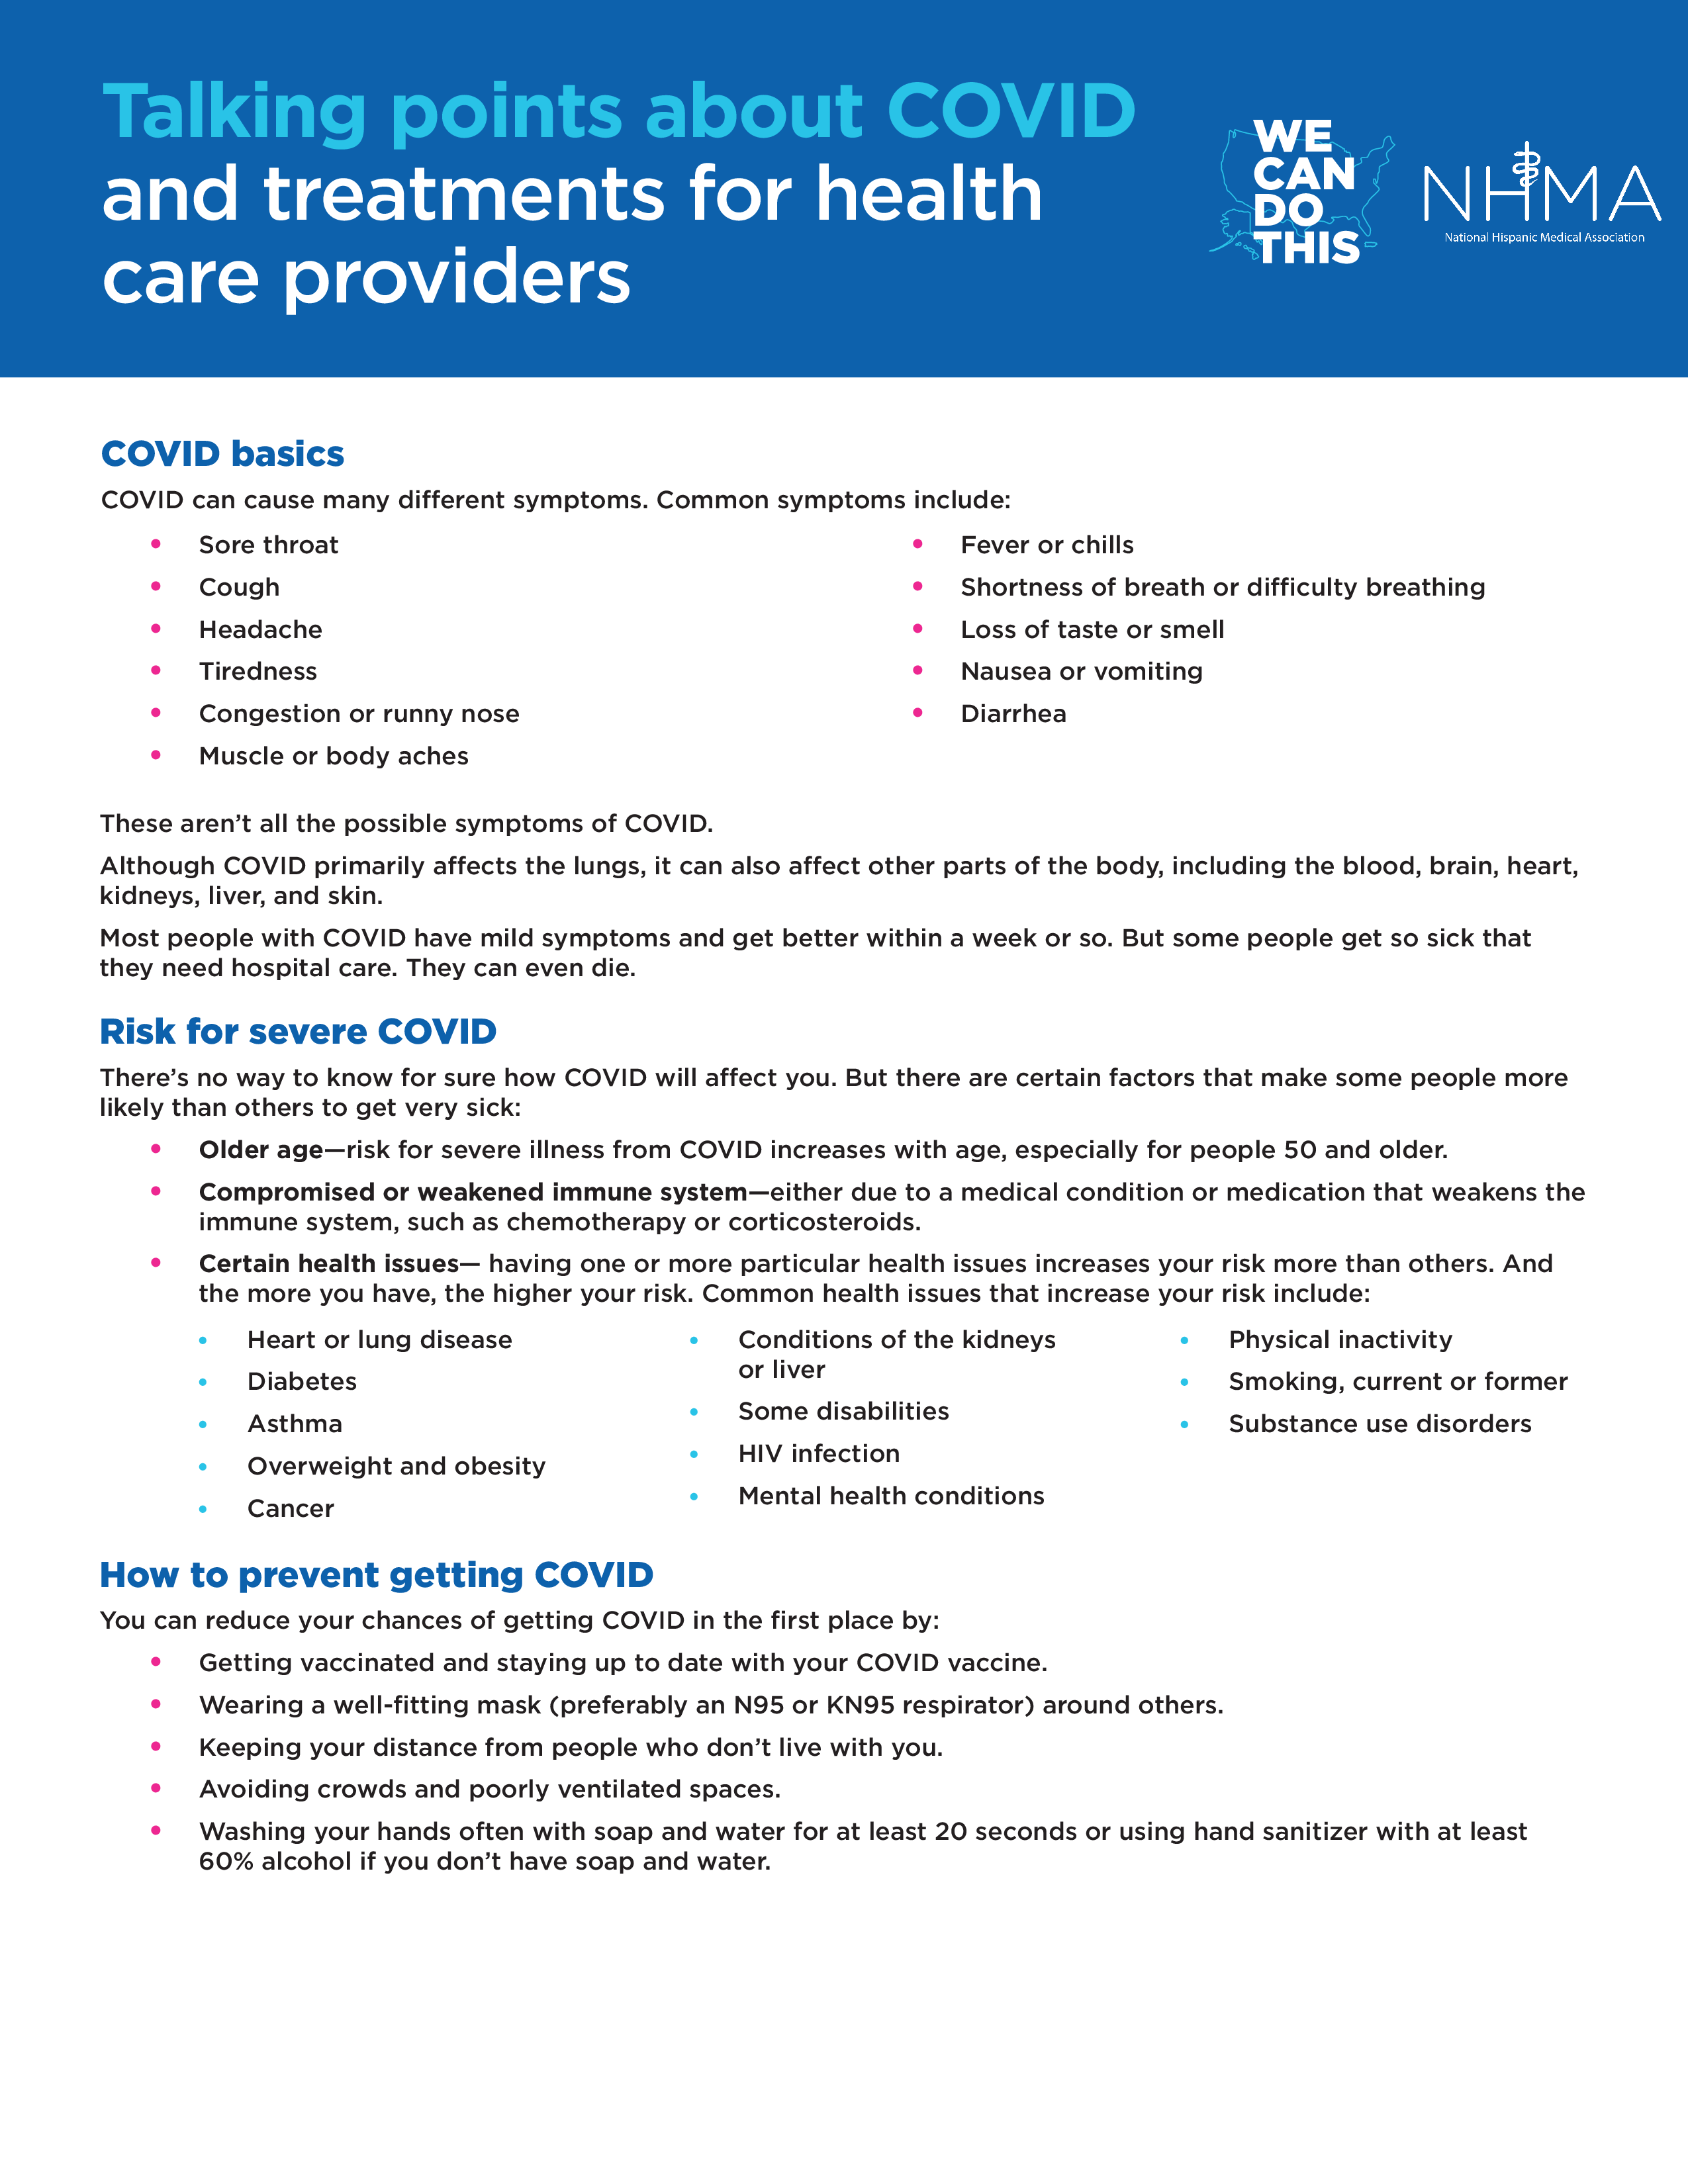 Factsheet on talking points and treatment options on COVID-19 for health care providers with "We Can DO This" and "NHMA" logo at the top right corner.